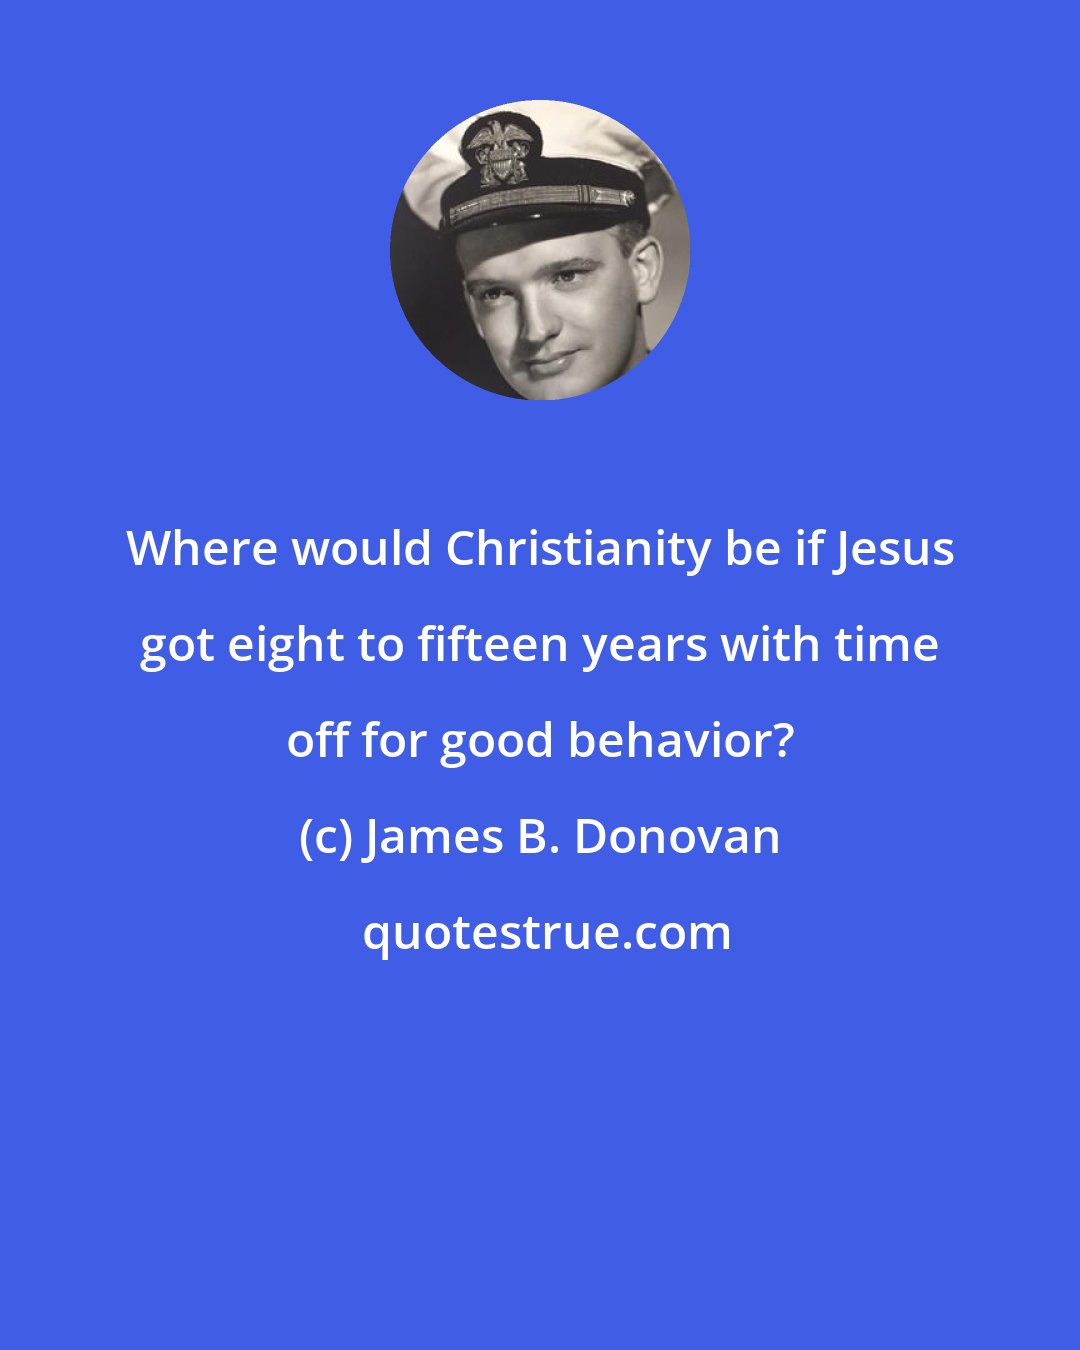 James B. Donovan: Where would Christianity be if Jesus got eight to fifteen years with time off for good behavior?